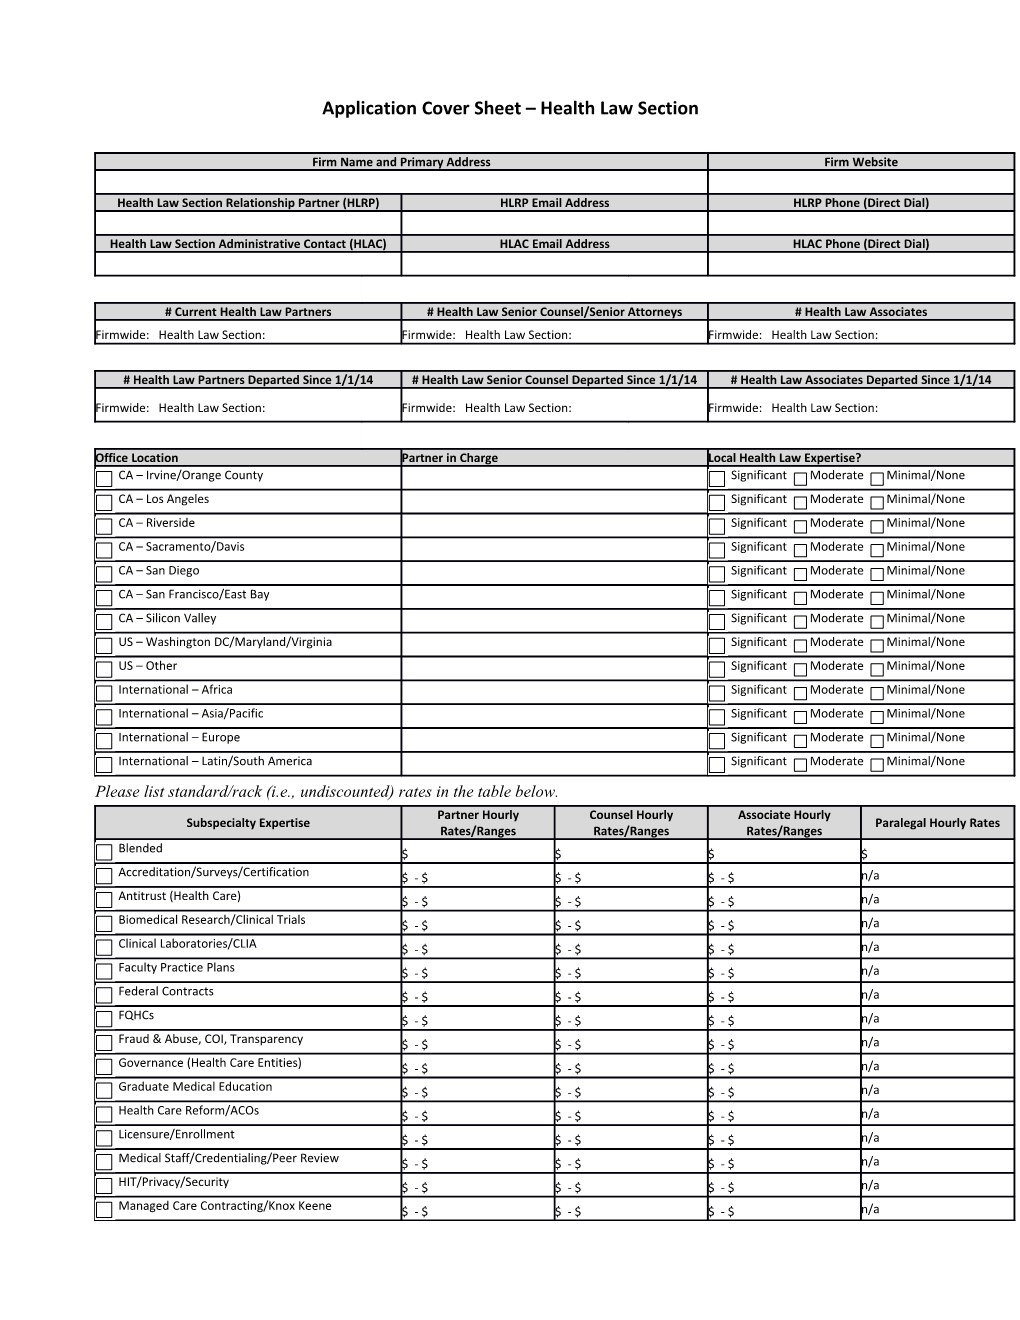 Application Cover Sheet Health Law Section